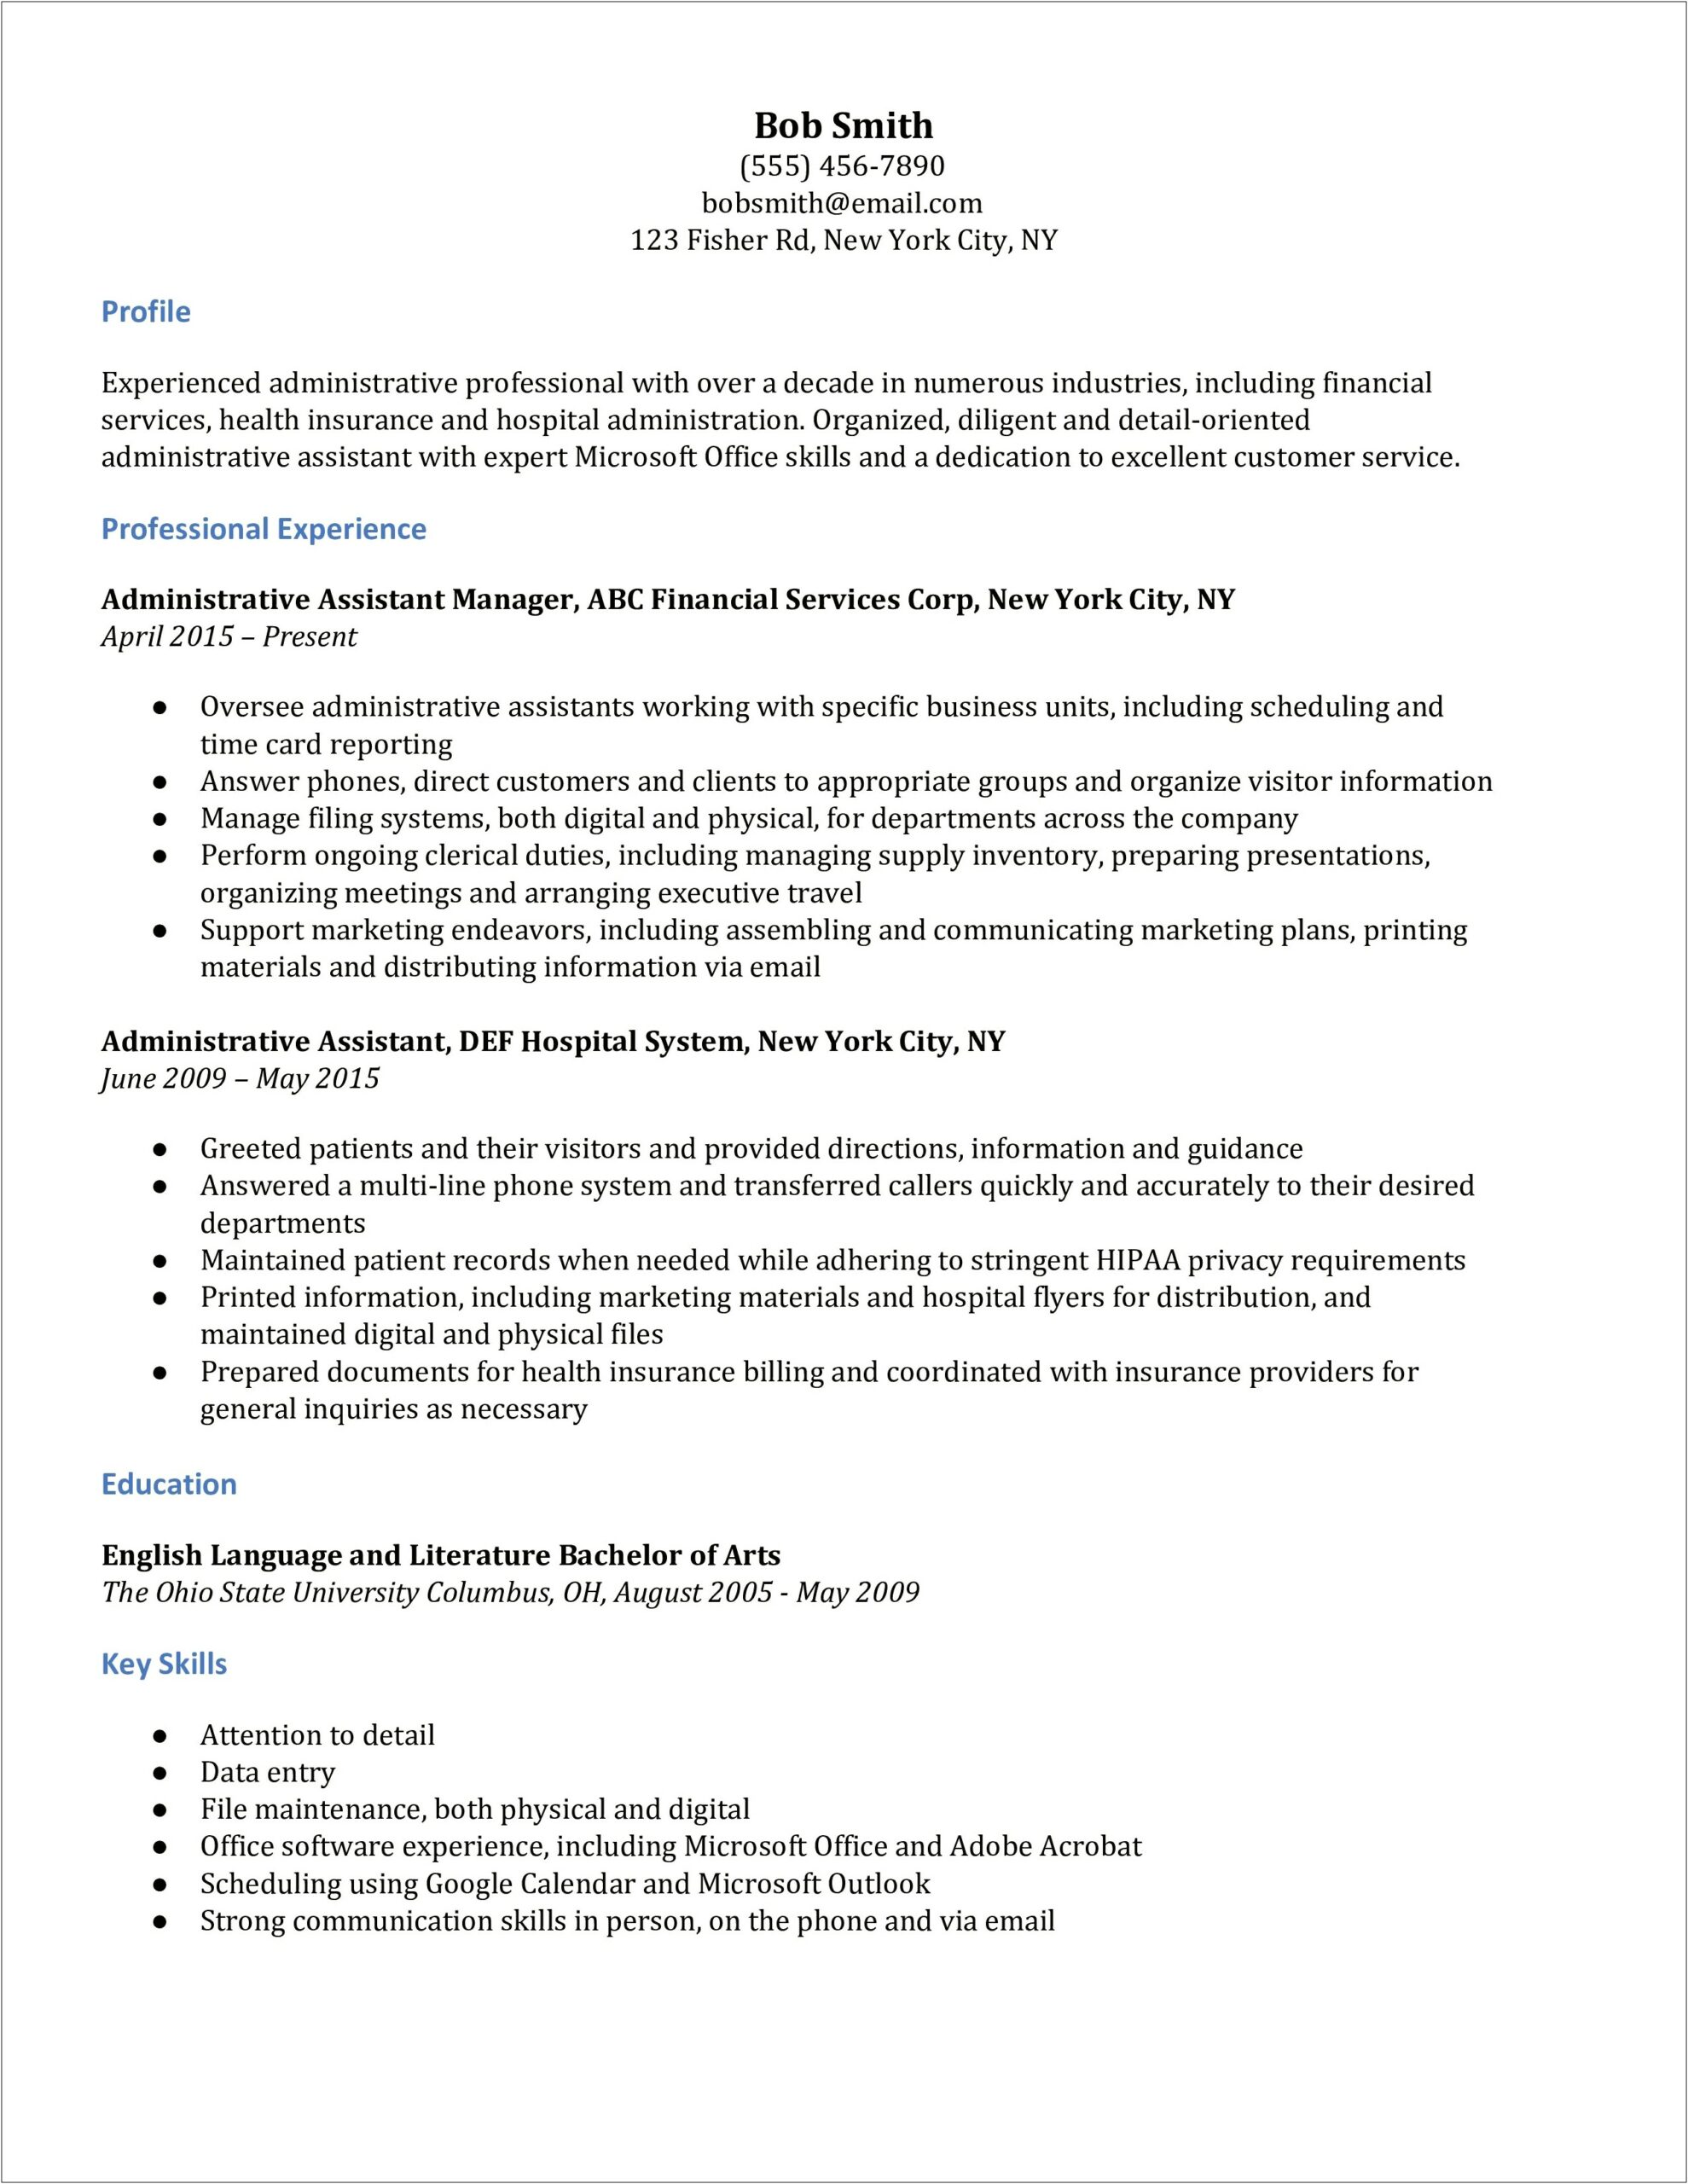 Best Resume Summary For Administrative Assistant